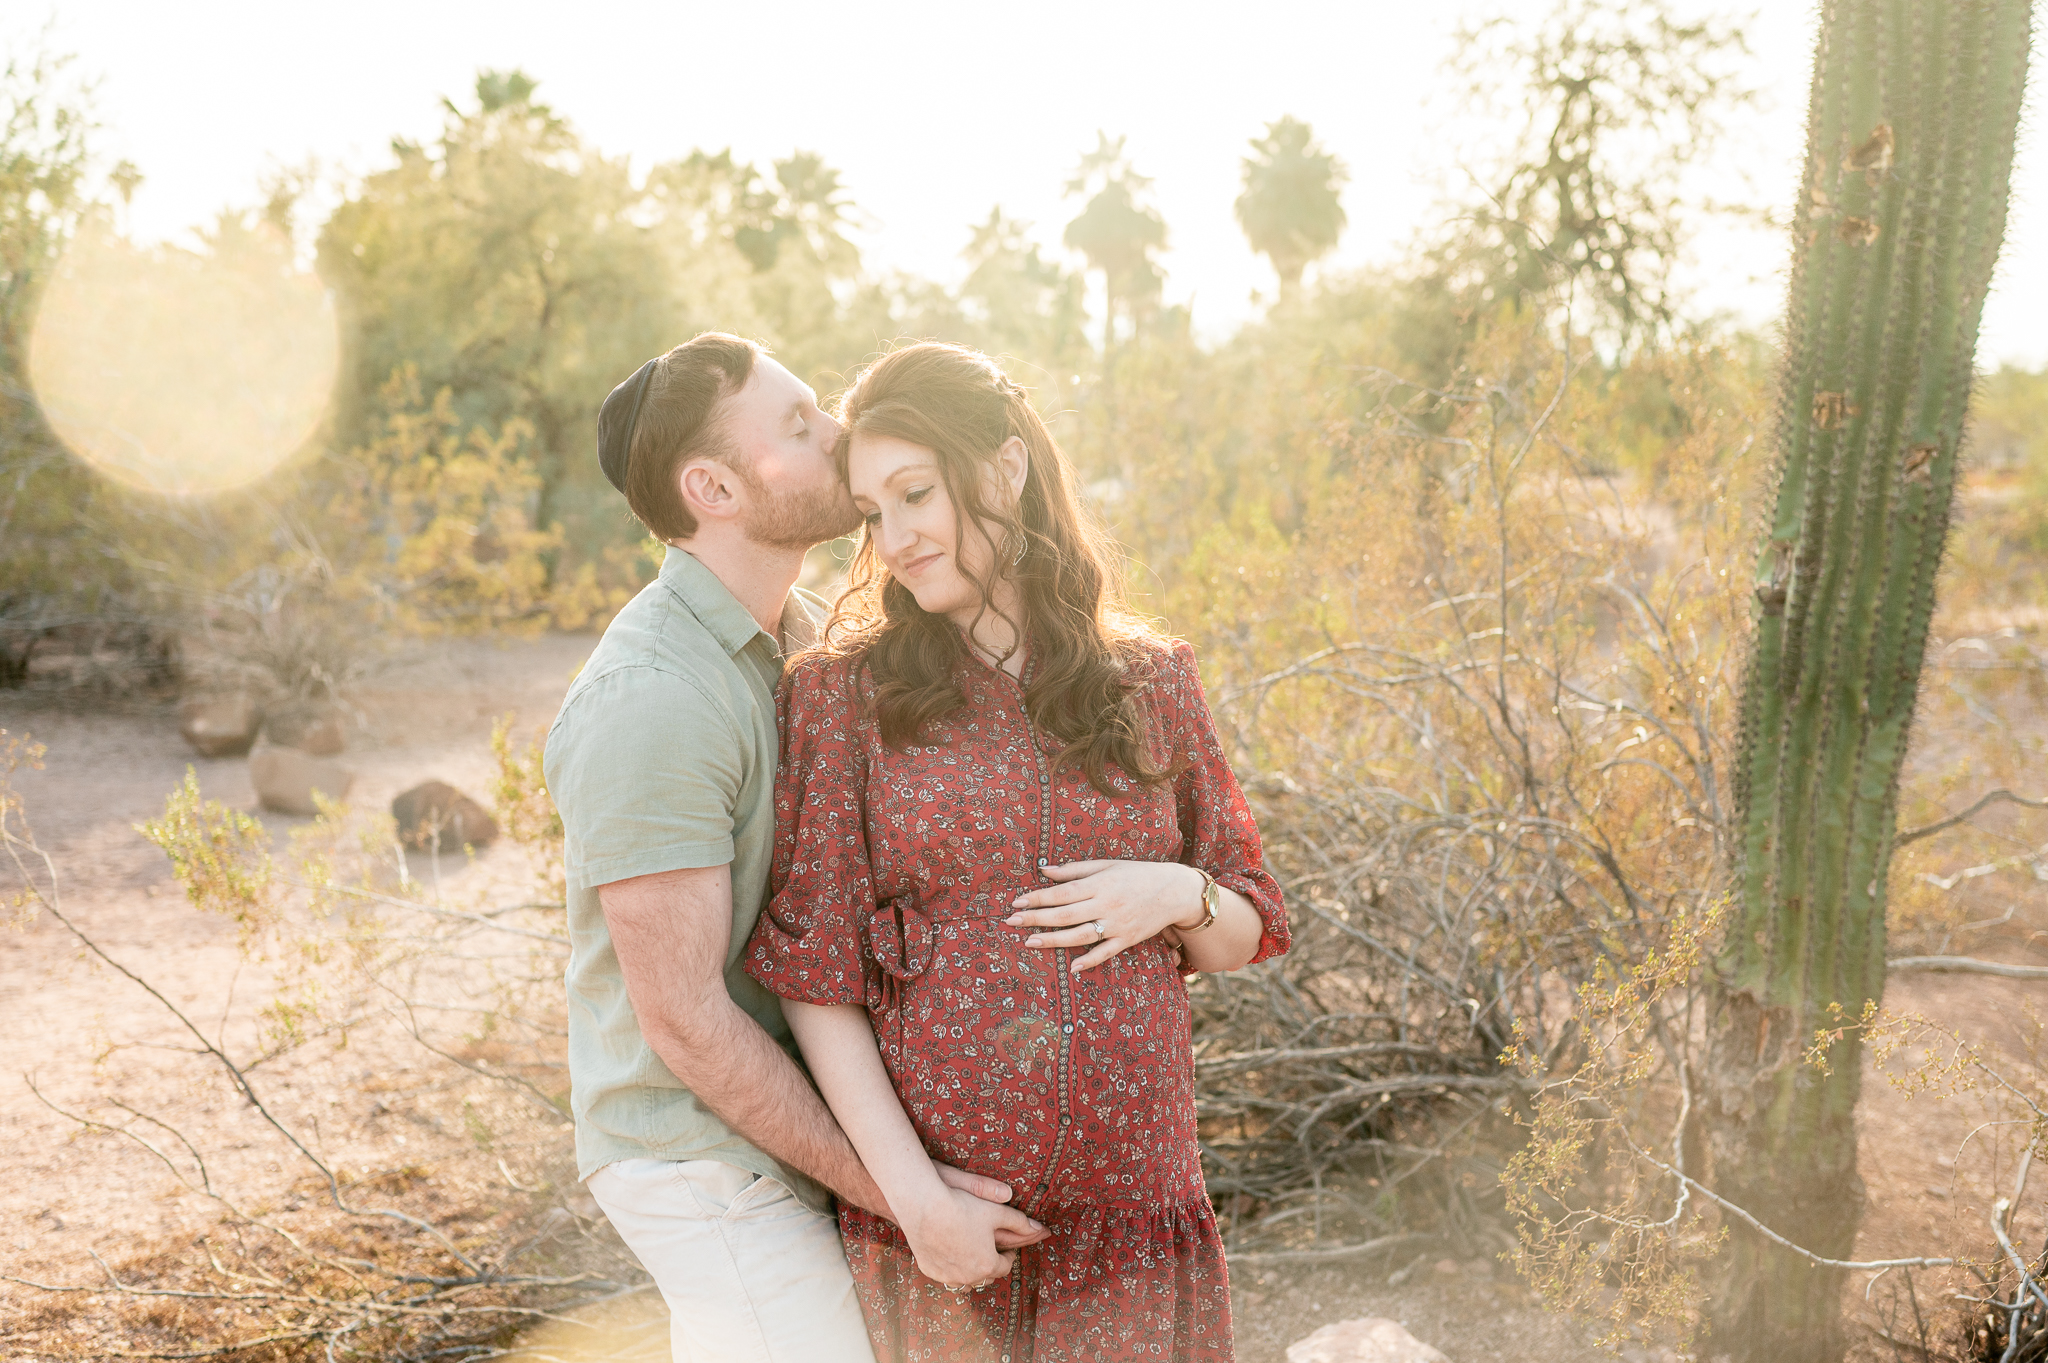 pregnant wife holding her tummy wearing a maroon floral dress while her husband holds her hand and kisses her temple at an outdoor maternity photo session